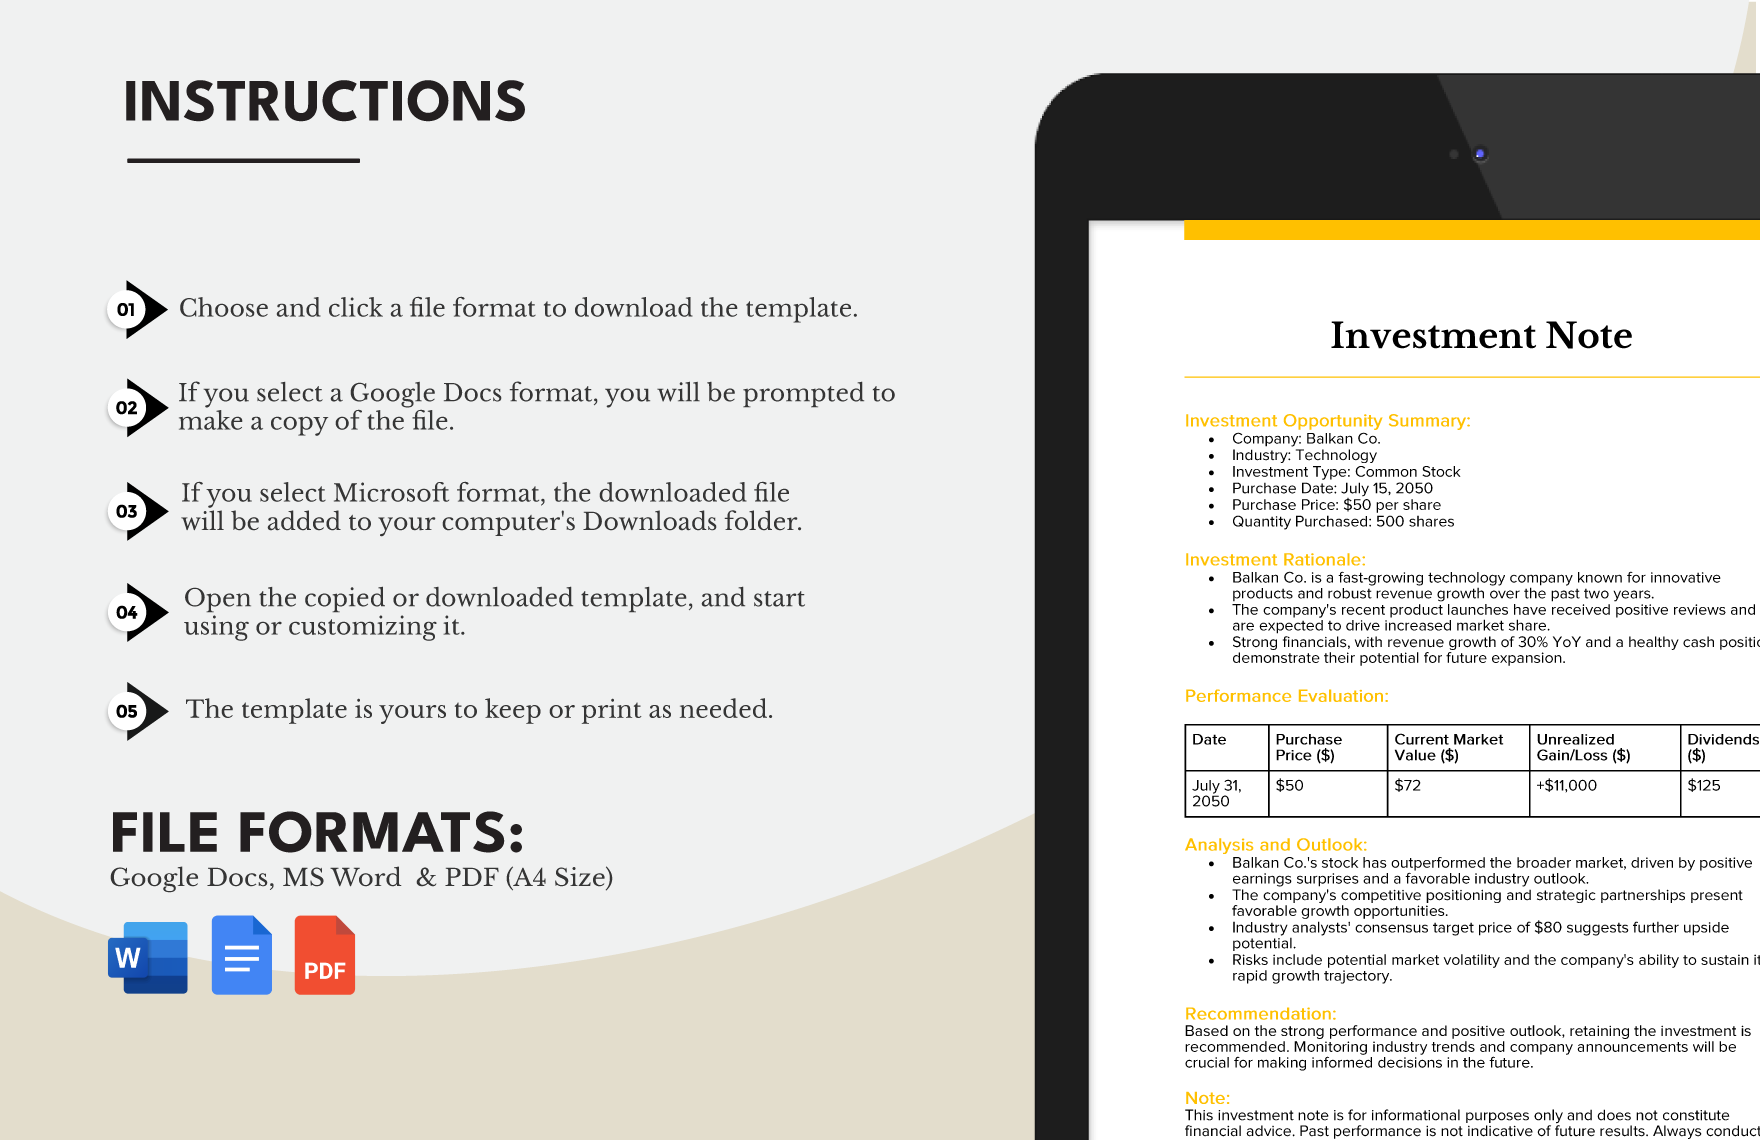 Investment Note Template